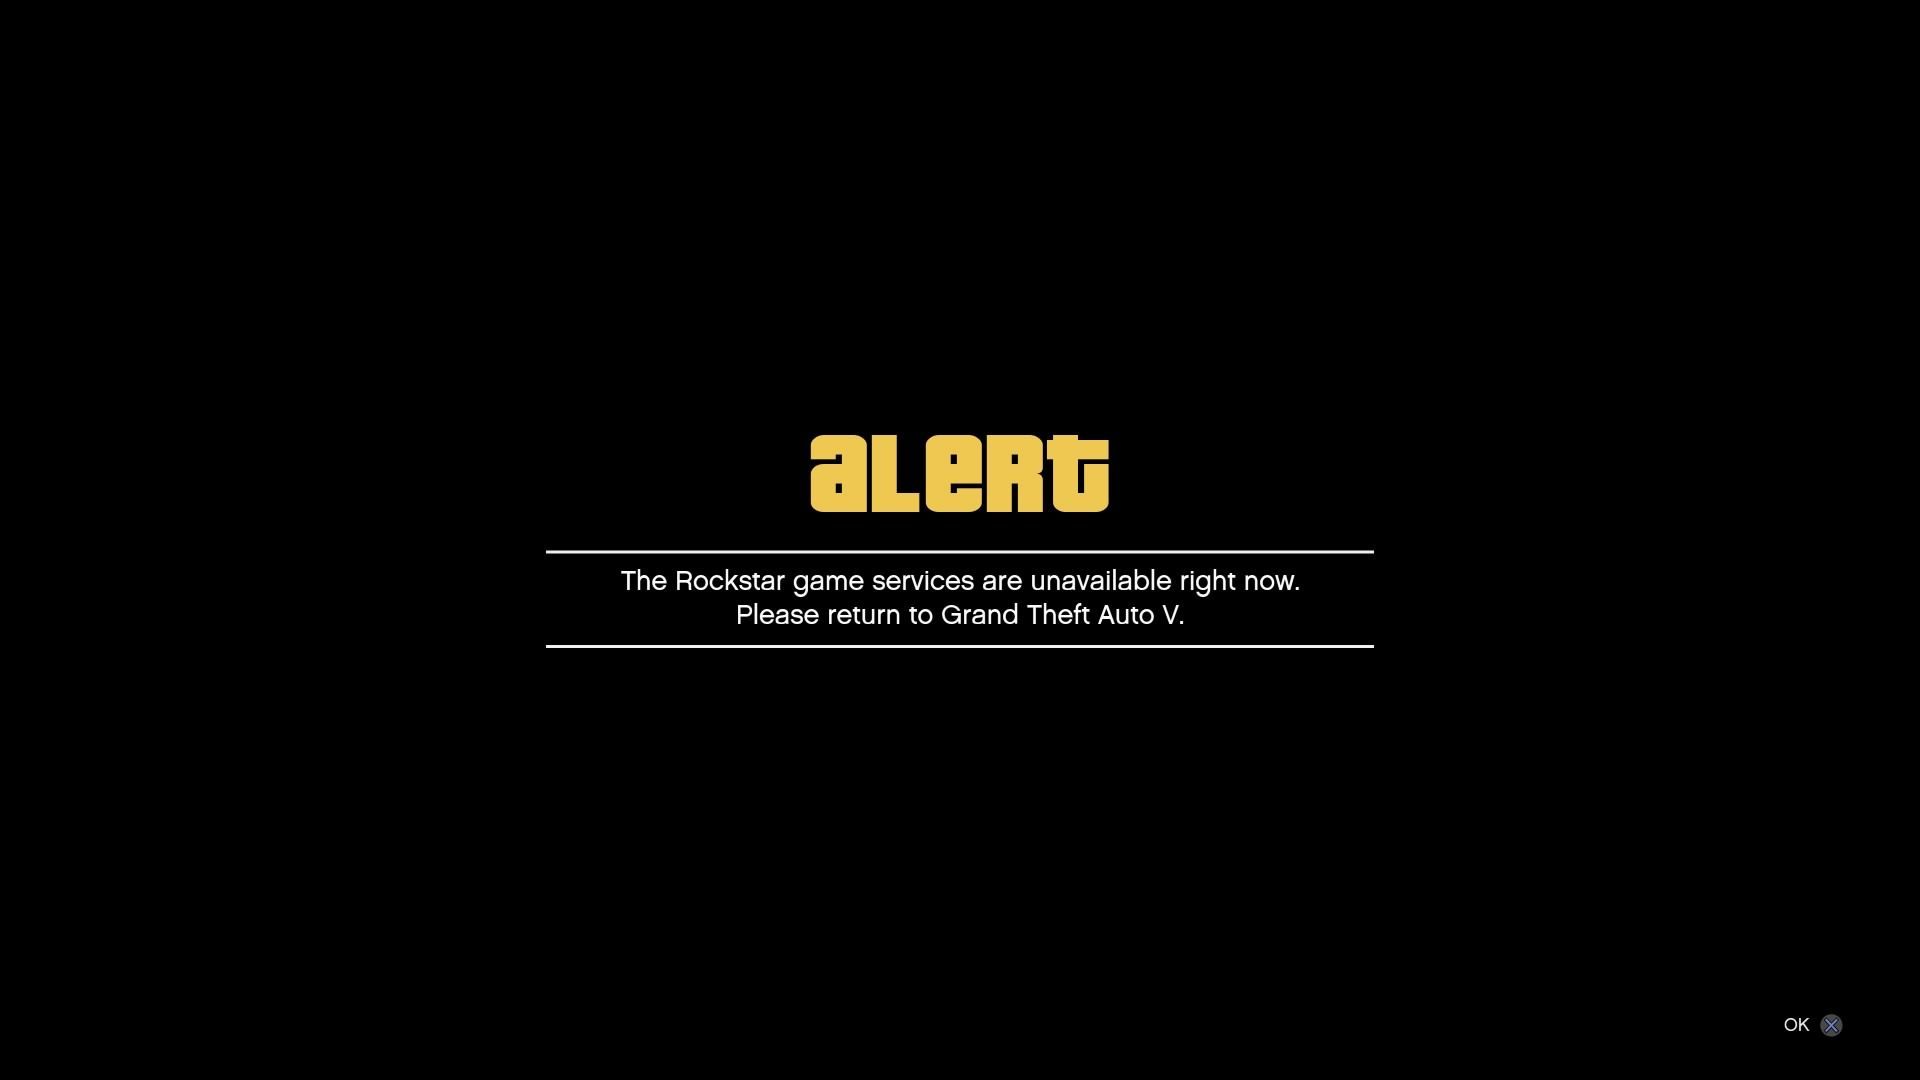 Rockstar game services are unavailable